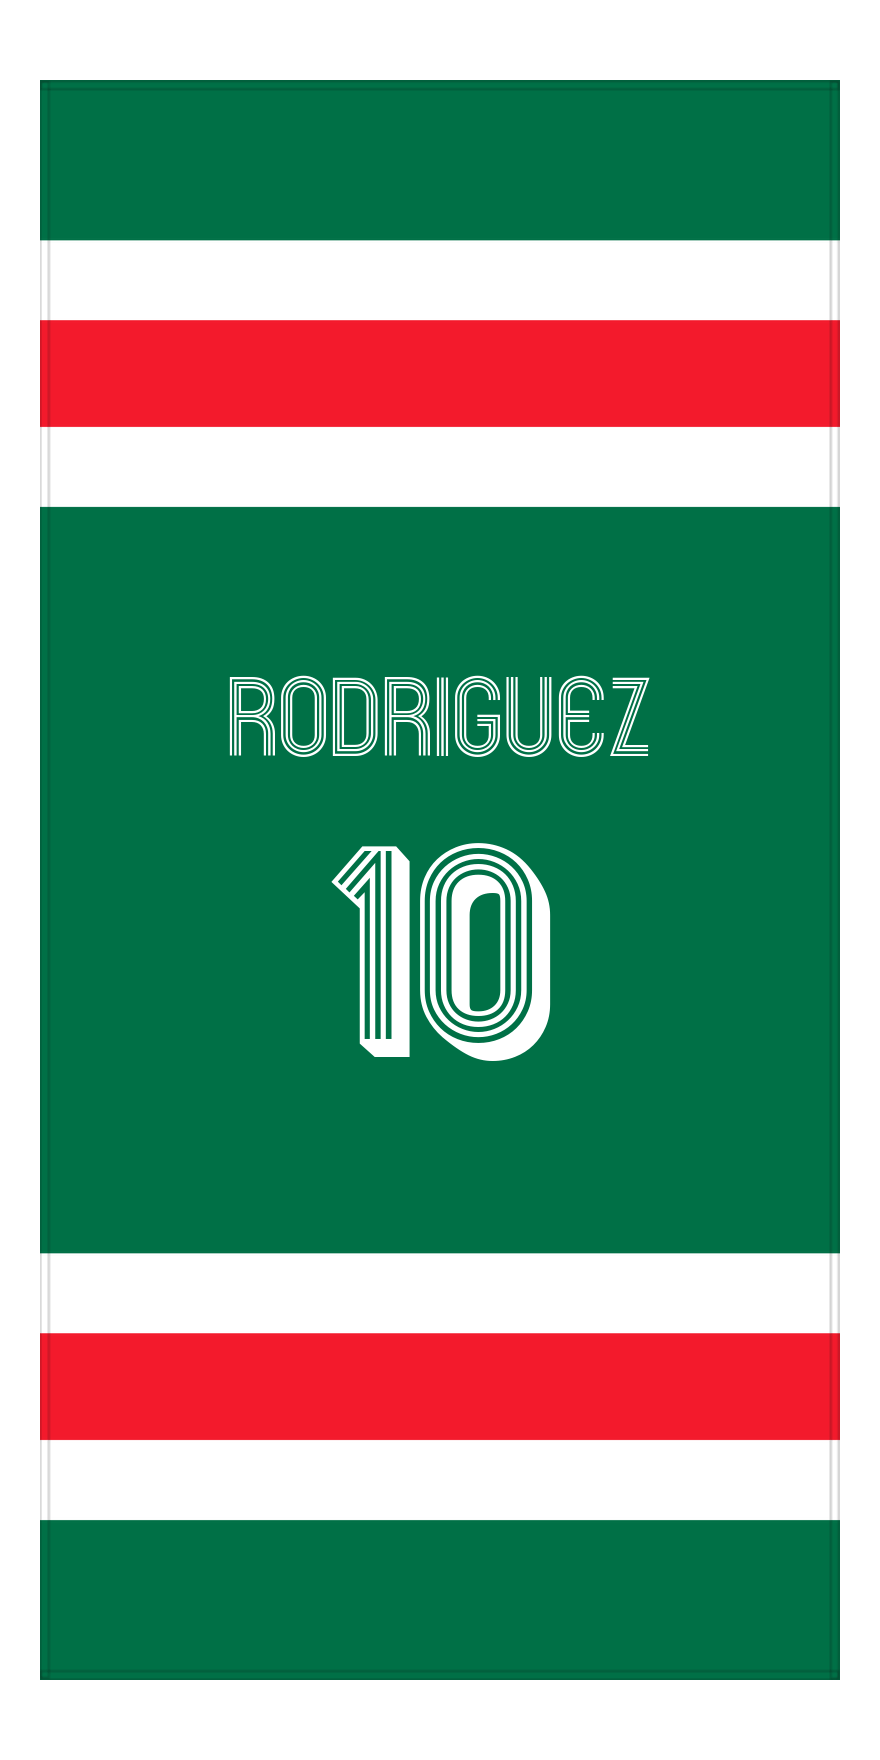 Personalized Jersey Number 1-on-1 Stripes Sports Beach Towel - Green and Red - Vertical Design - Front View